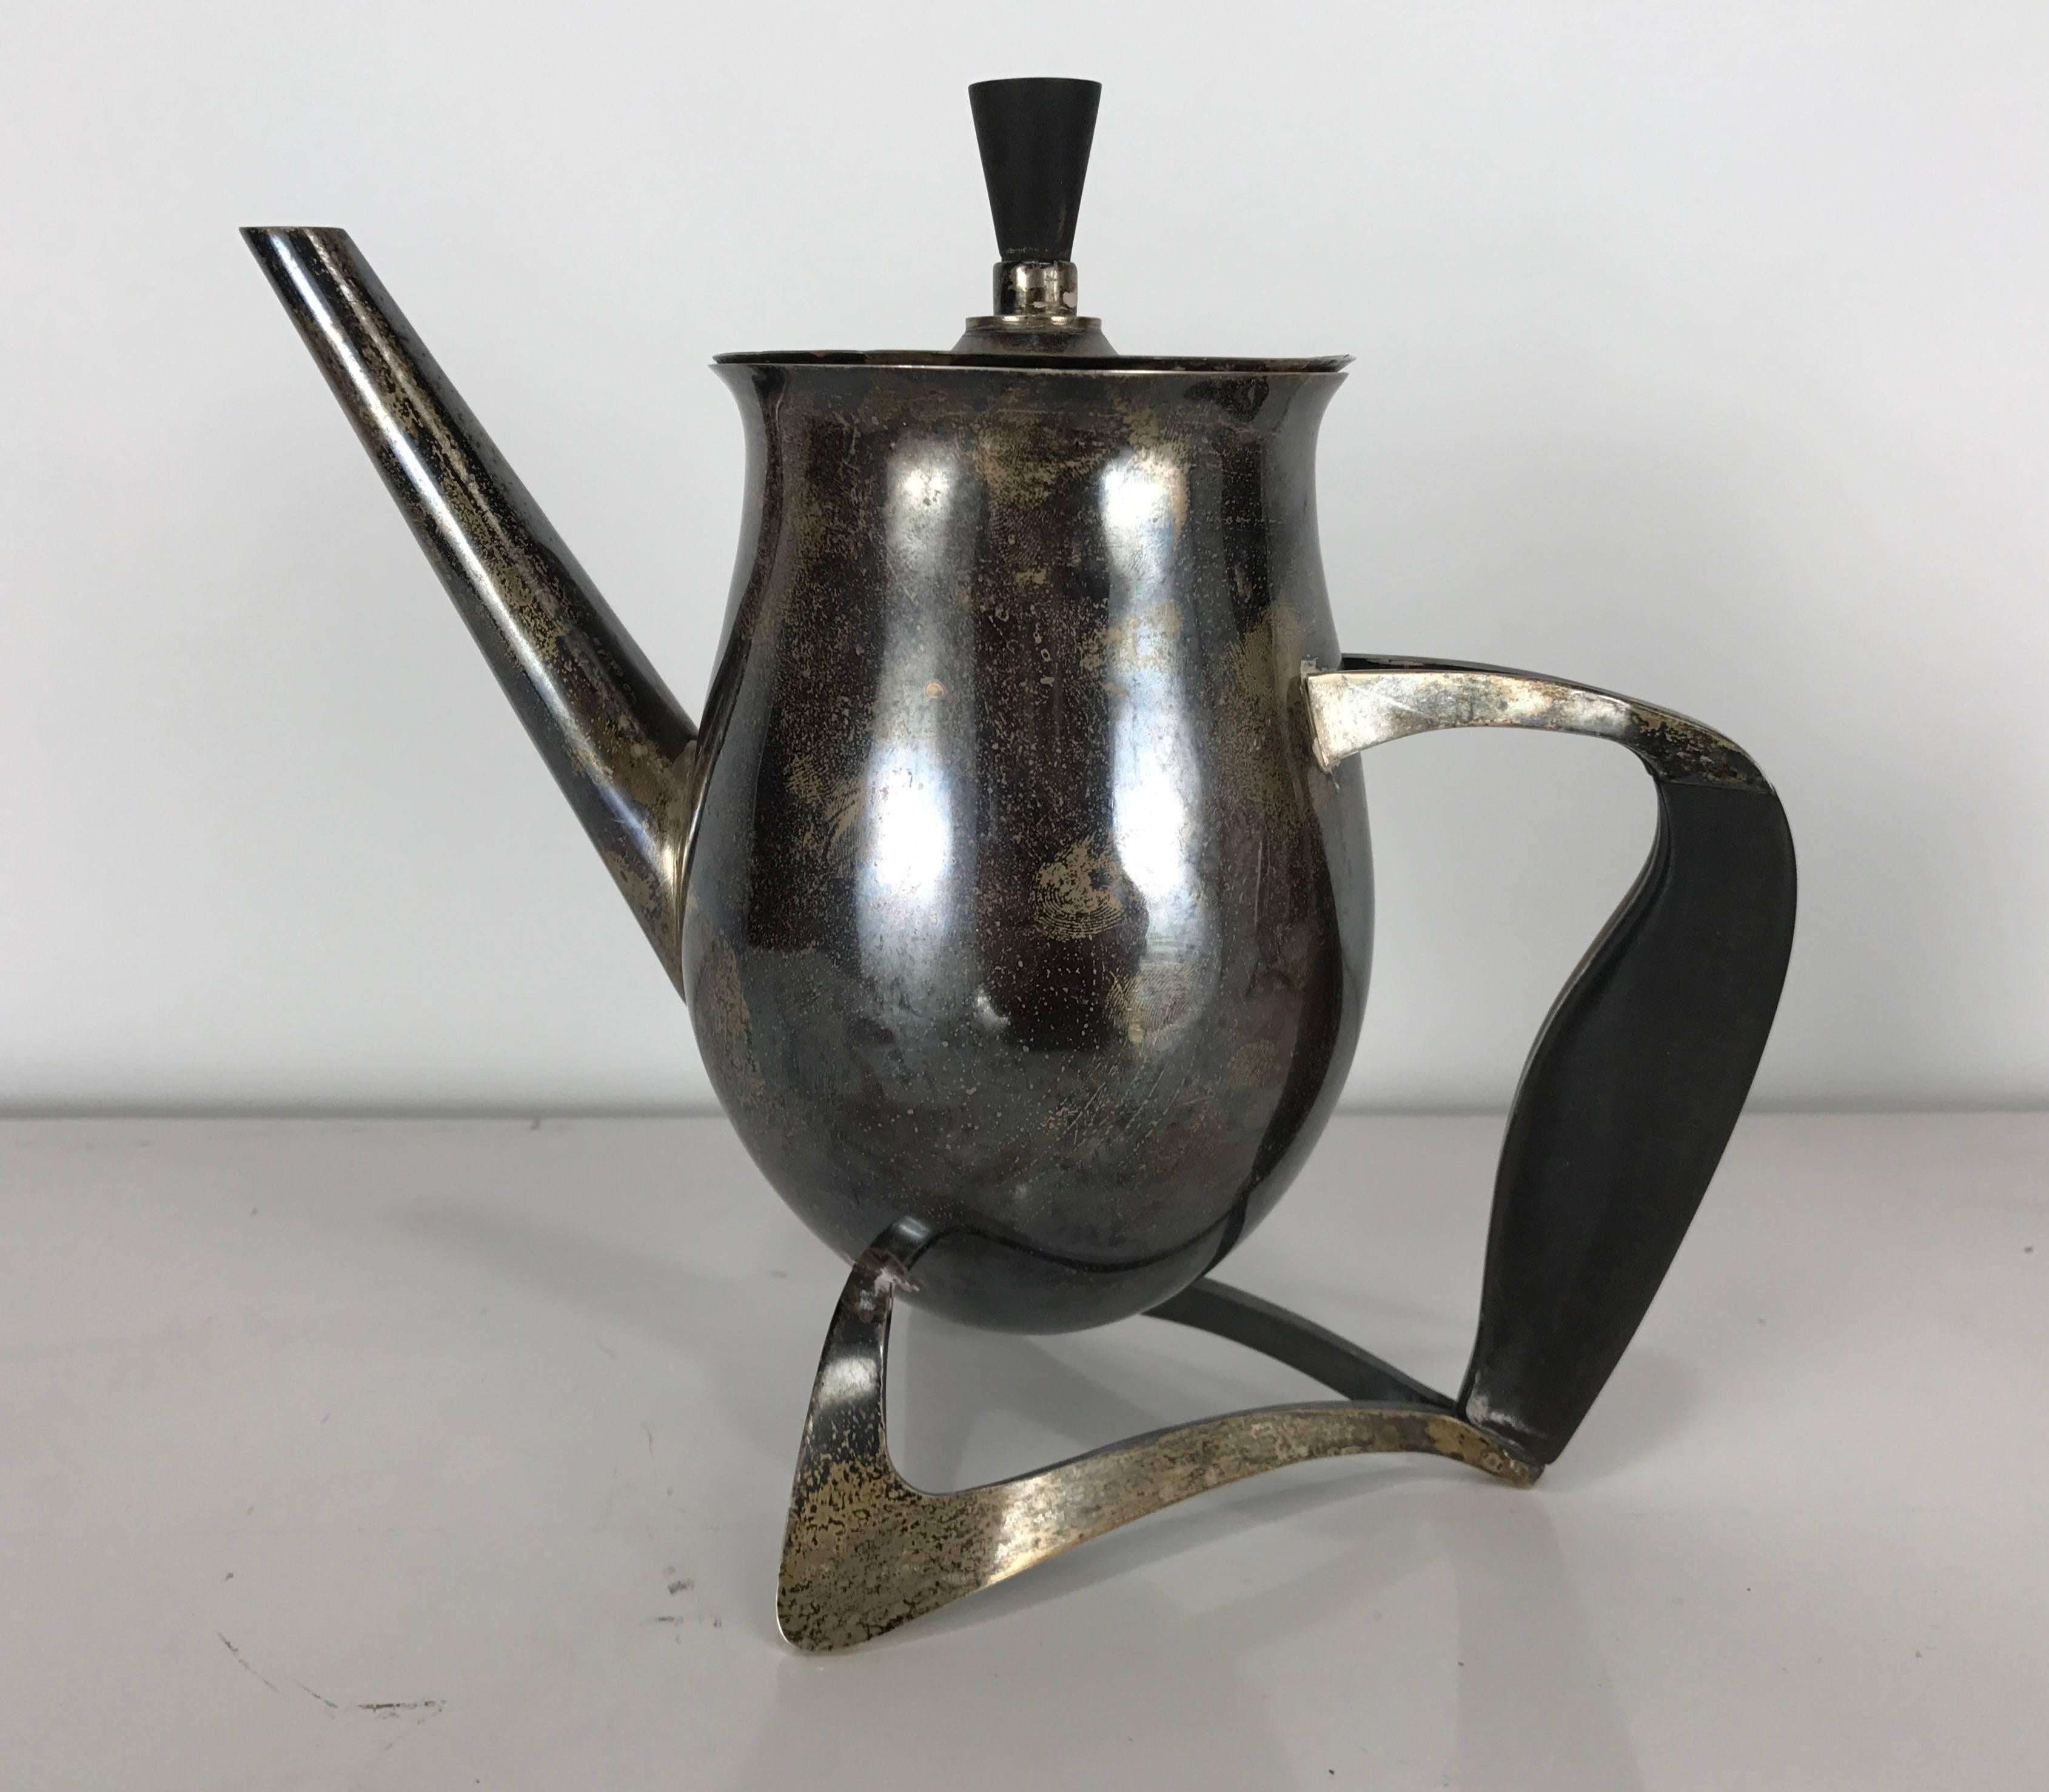 Stunning pure silver coffee and tea set with original renderings (drawings),, Hand executed by Paul Tarantino believed to be designed for Georg Jensen, (never produced), Exaggerated Art Deco, Nouveau design, Set is in as found condition, has not